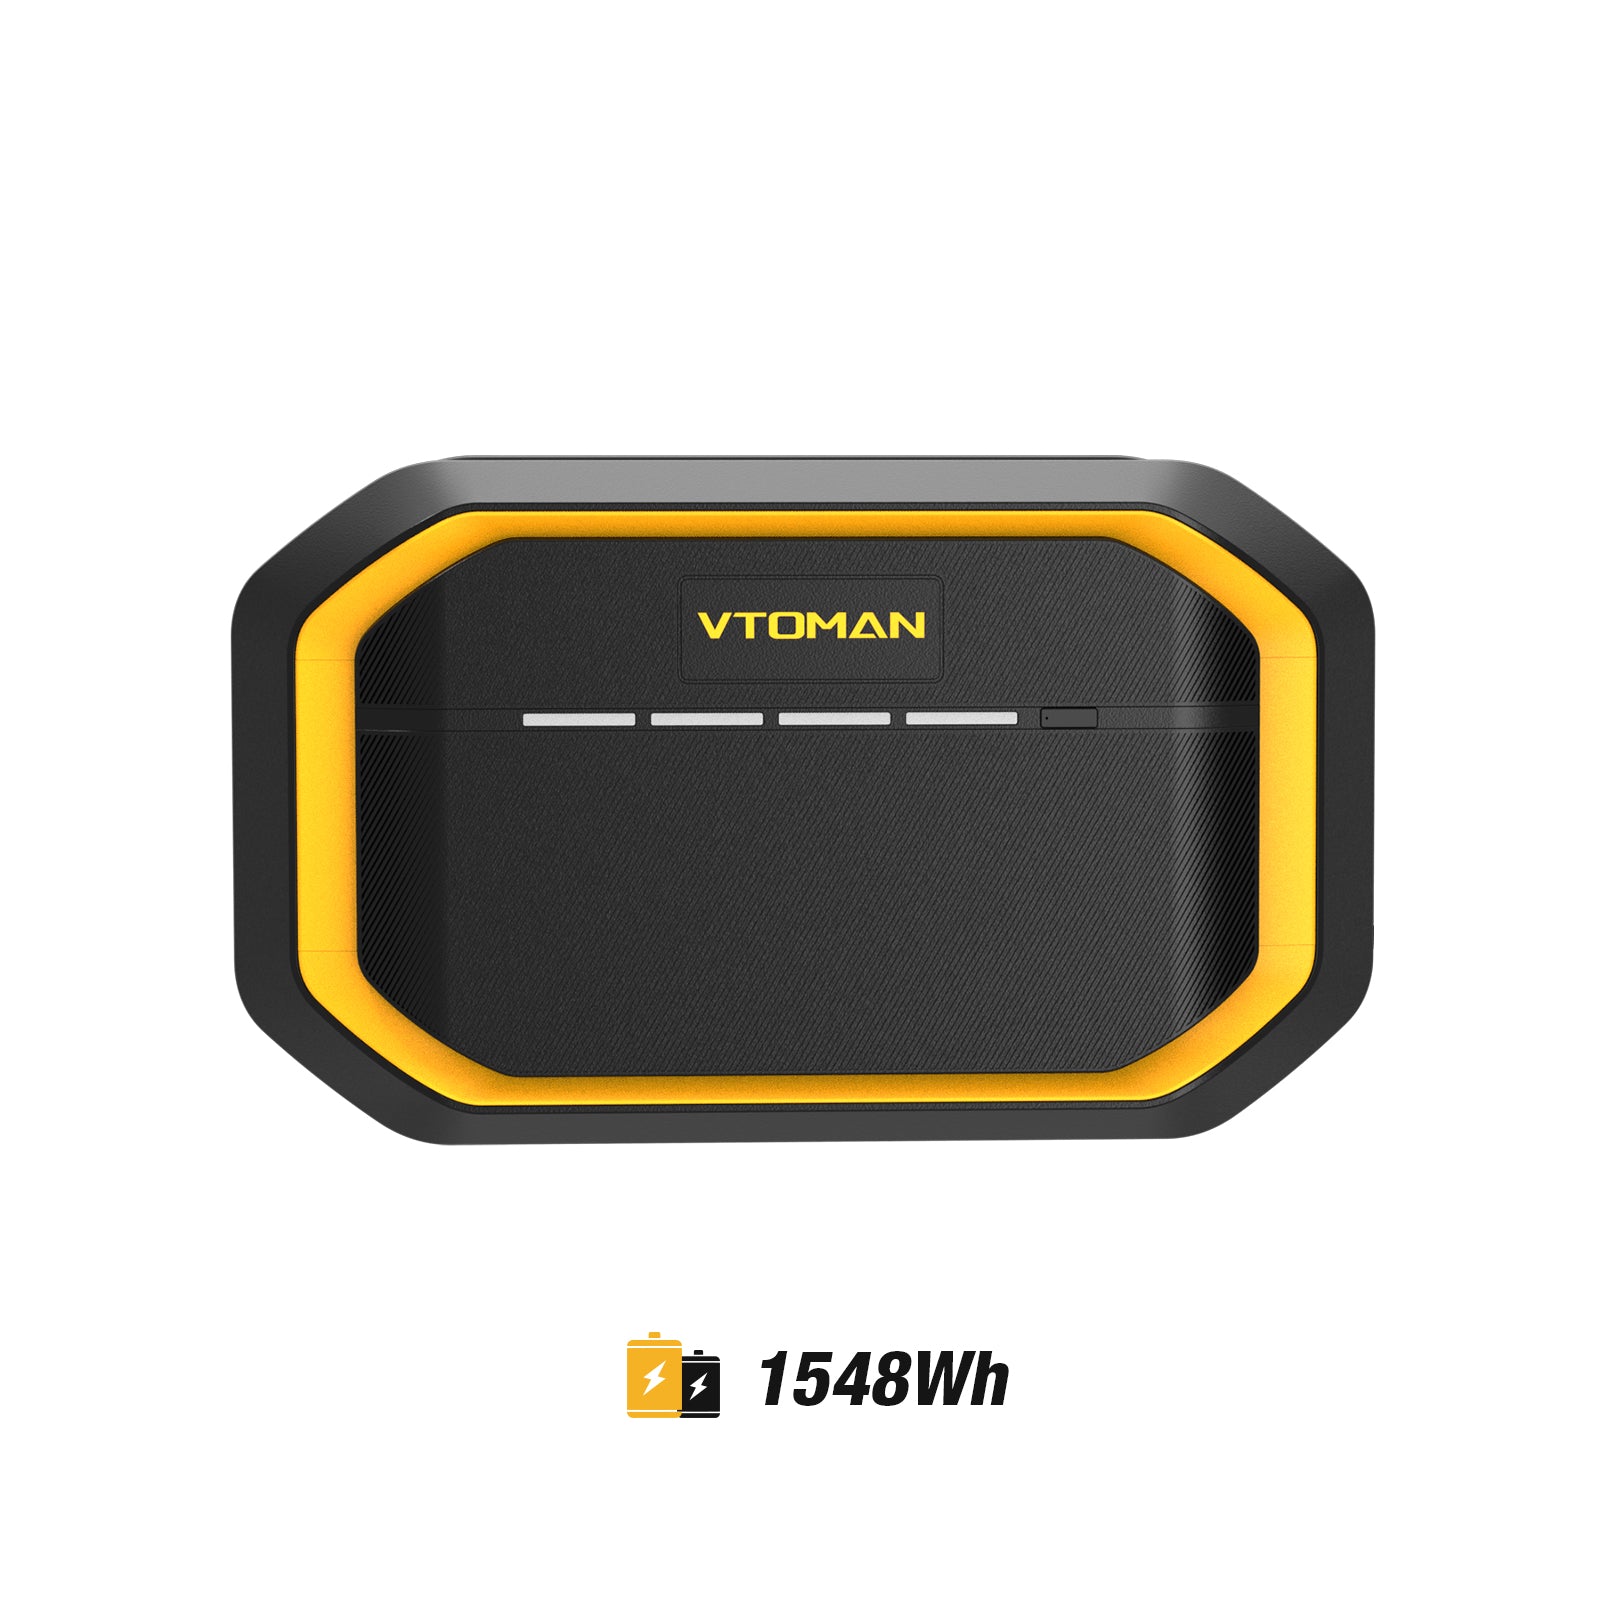 VTOMAN 1548Wh Extra Battery Compatible With FlashSpeed 1500/1000